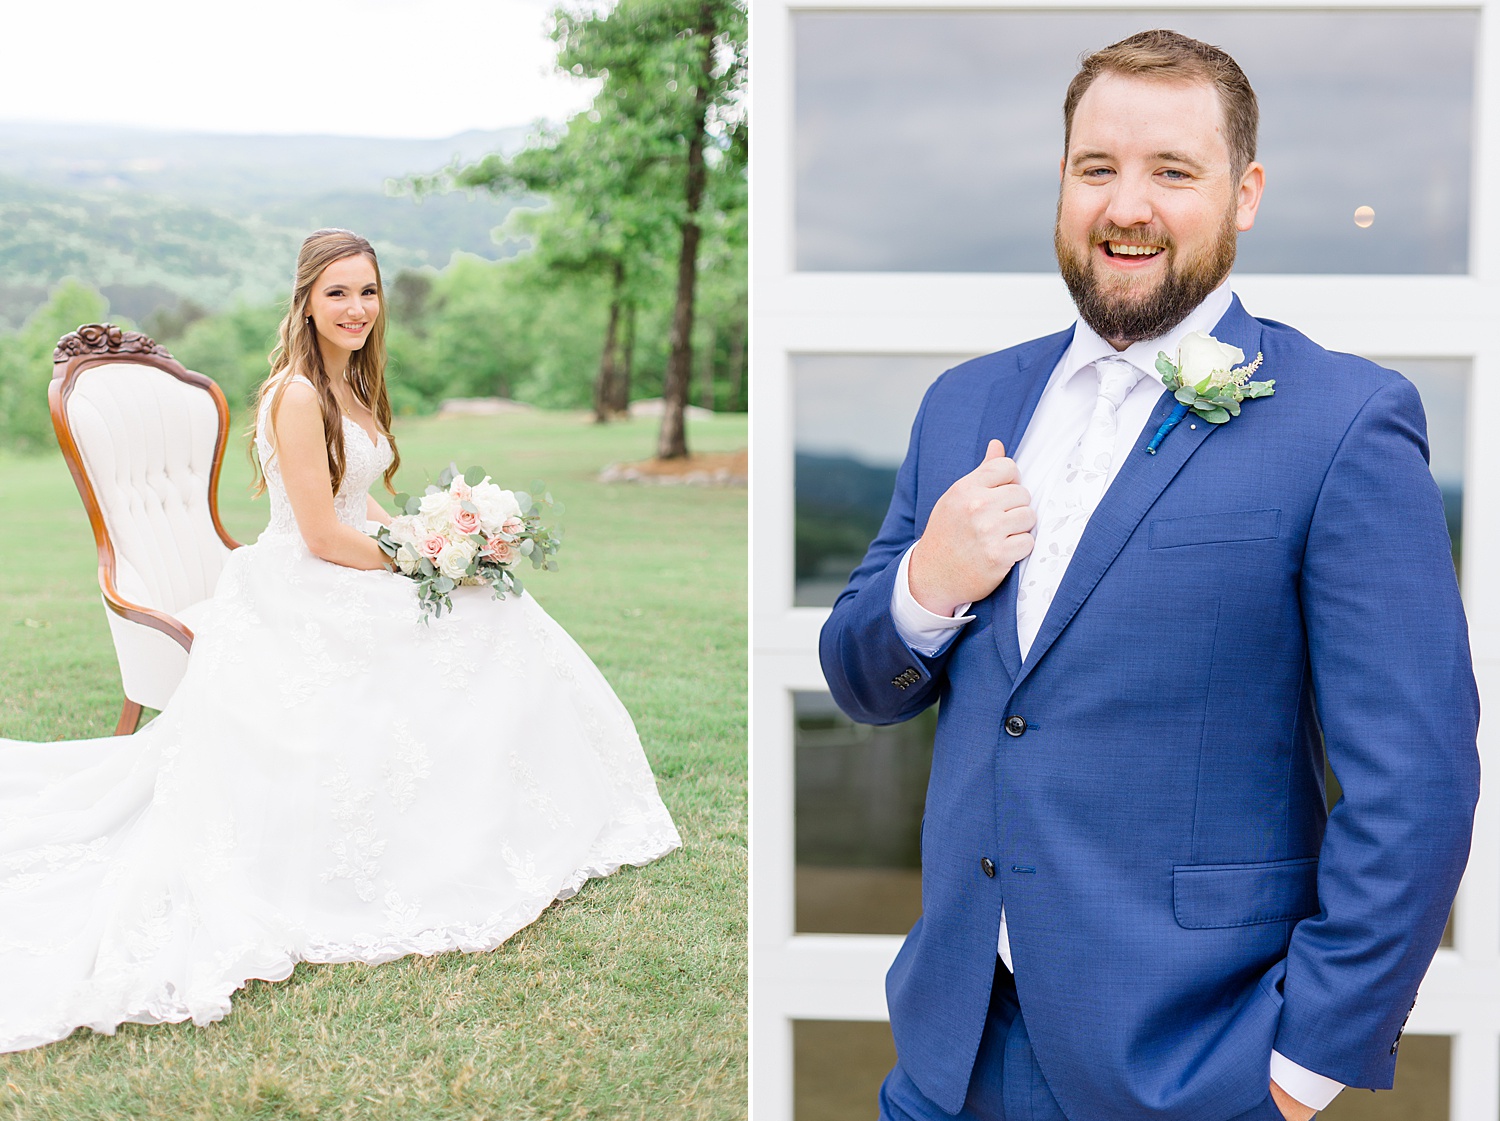 bride and groom before Romantic Spring Wedding ceremony at Weddings at Cabin Bluff in Springville, AL